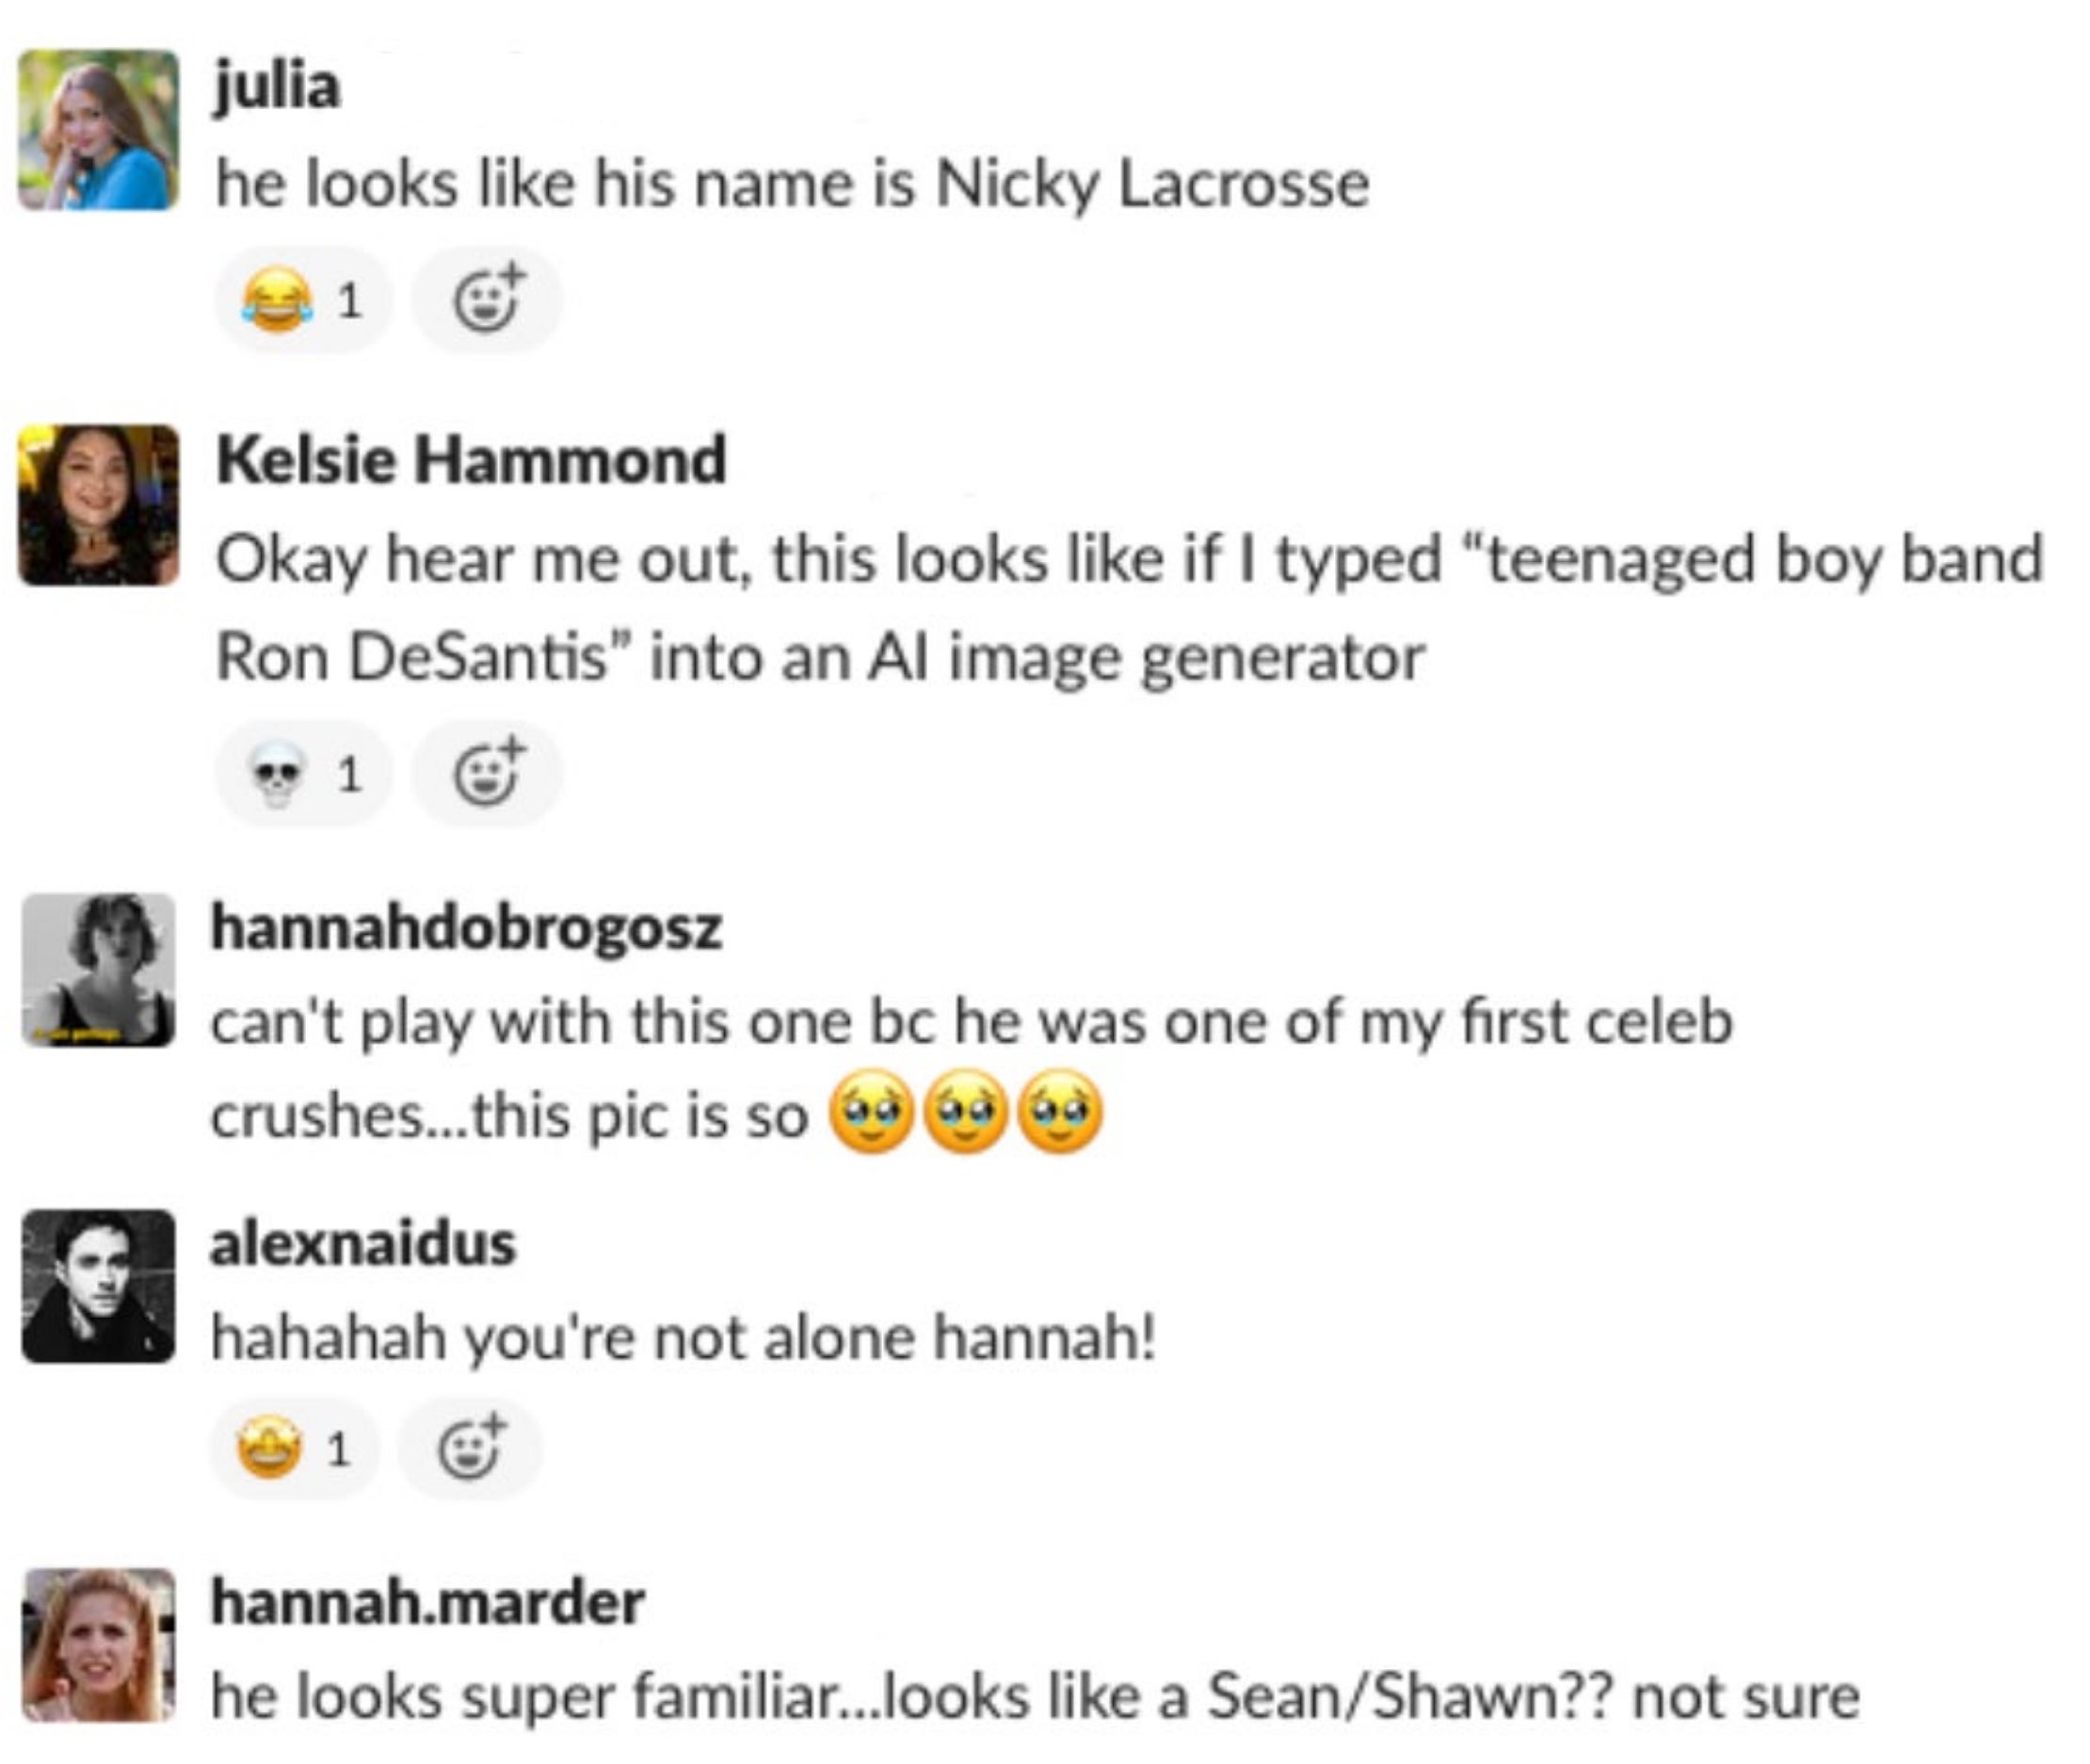 &quot;he looks like his name is Nicky Lacrosse&quot;